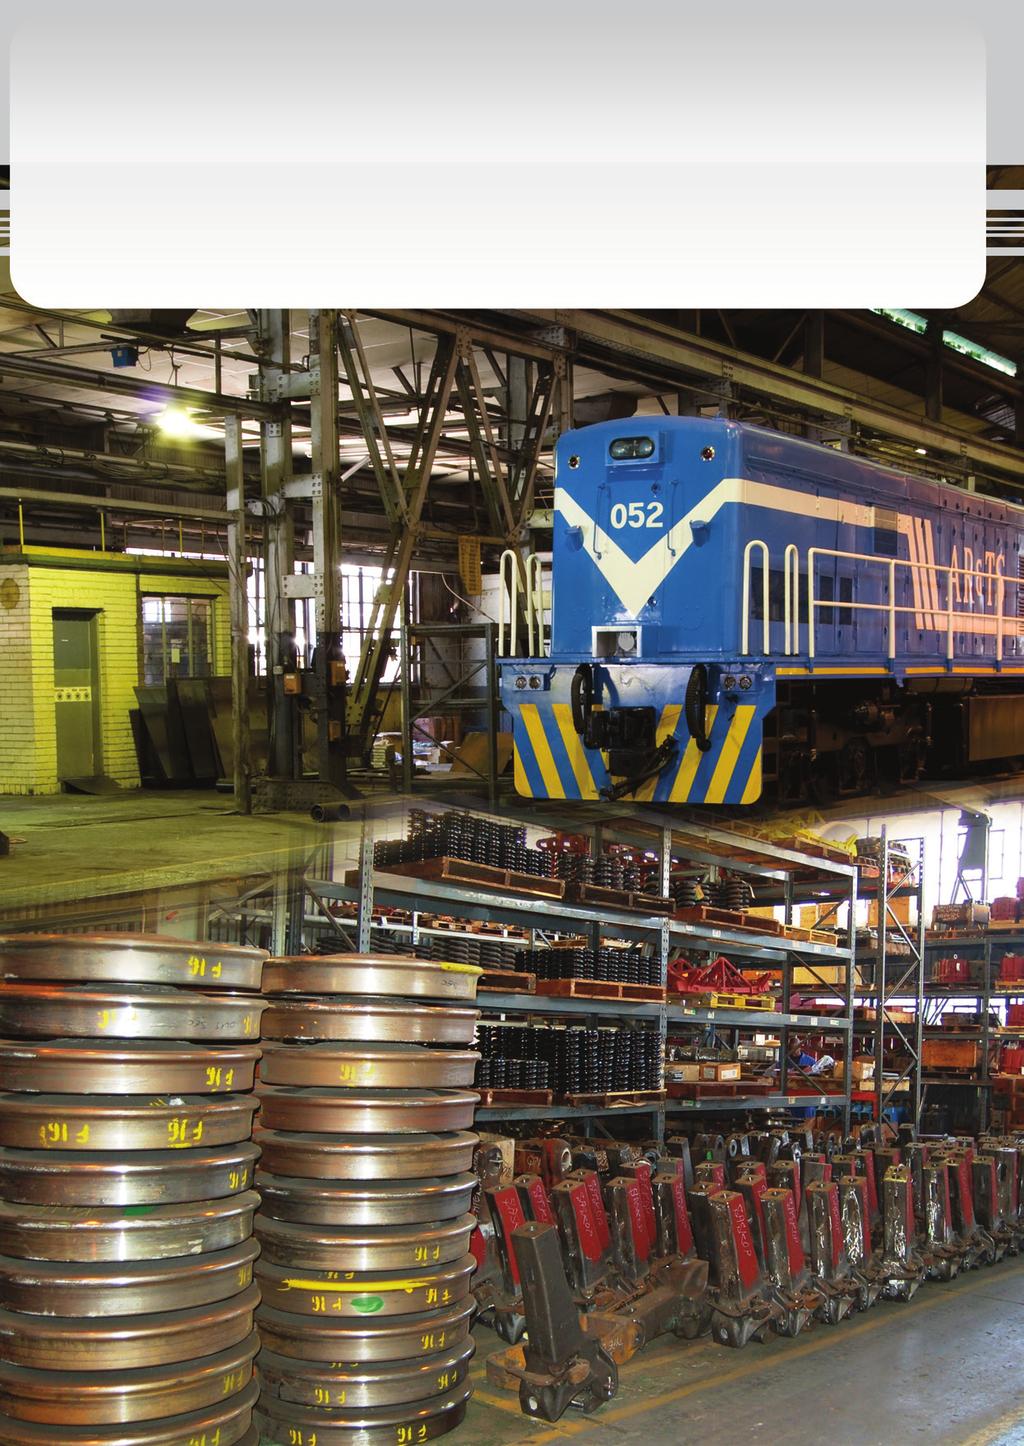 Railway Supplies Renowned as a most reliable manufacturer, supplier and stockist of a diverse range of railroad equipment